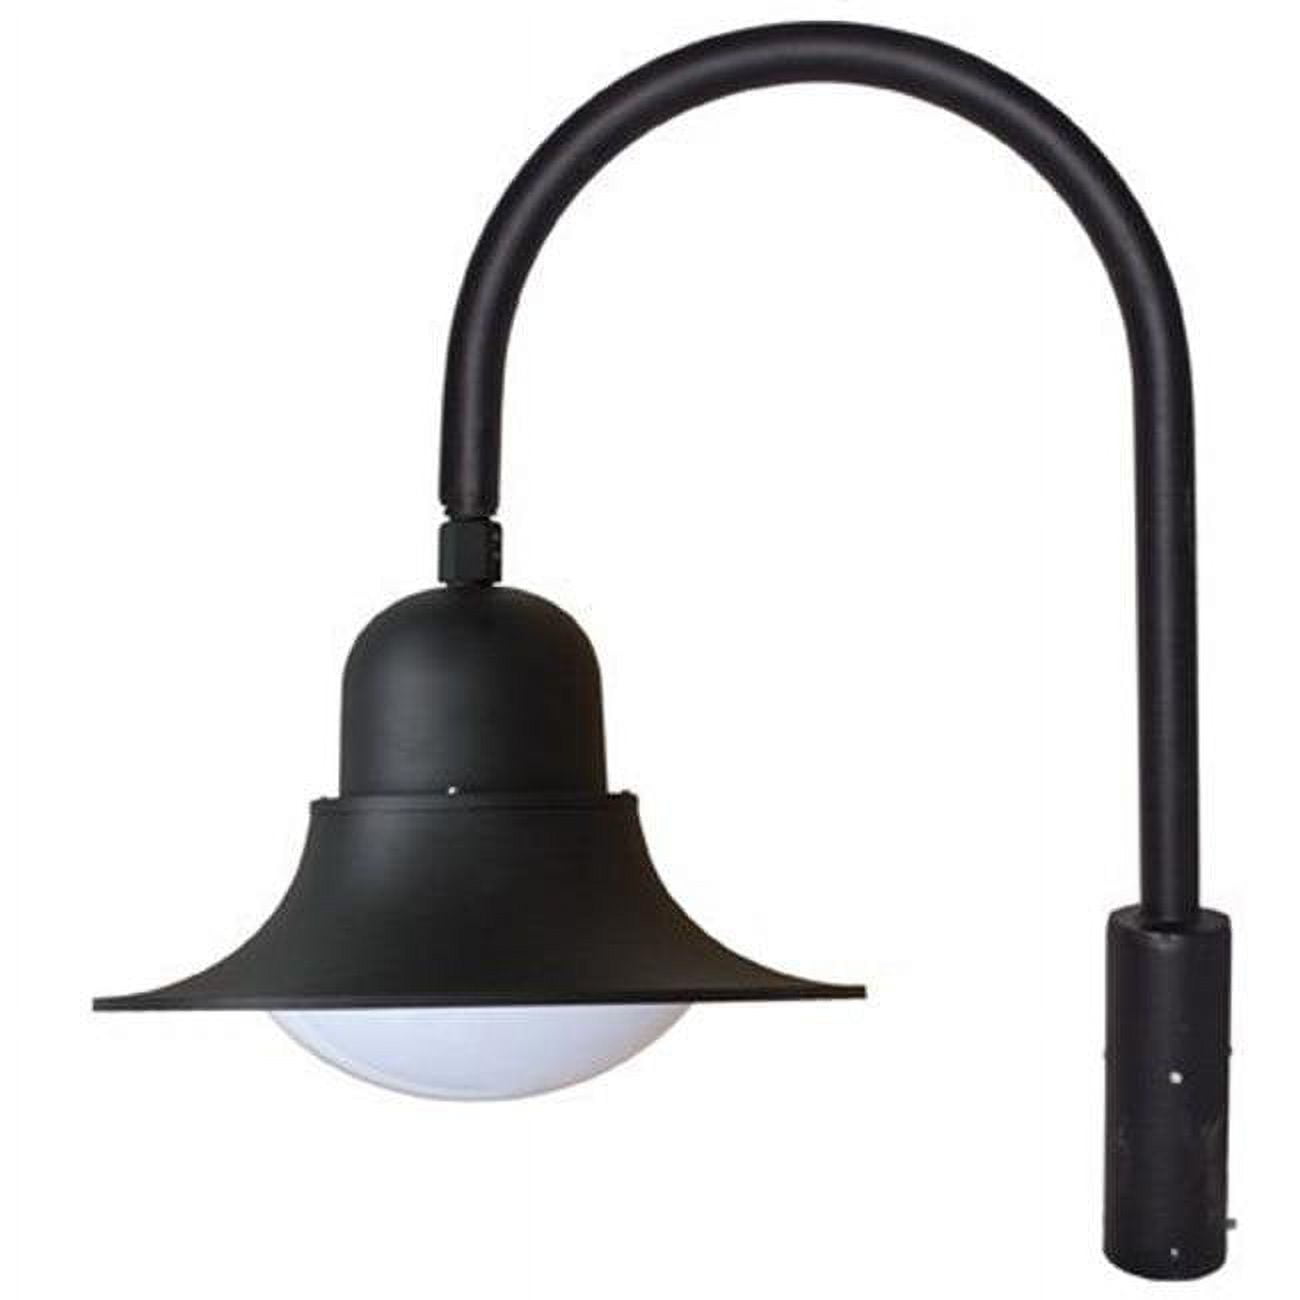 Picture of Dabmar Lighting GM615-B 35W 120V Powder Coated Cast Aluminum Post Top Light Fixture with Metal Halide Lamp, Black - 35.50 x 22 x 30.92 in.